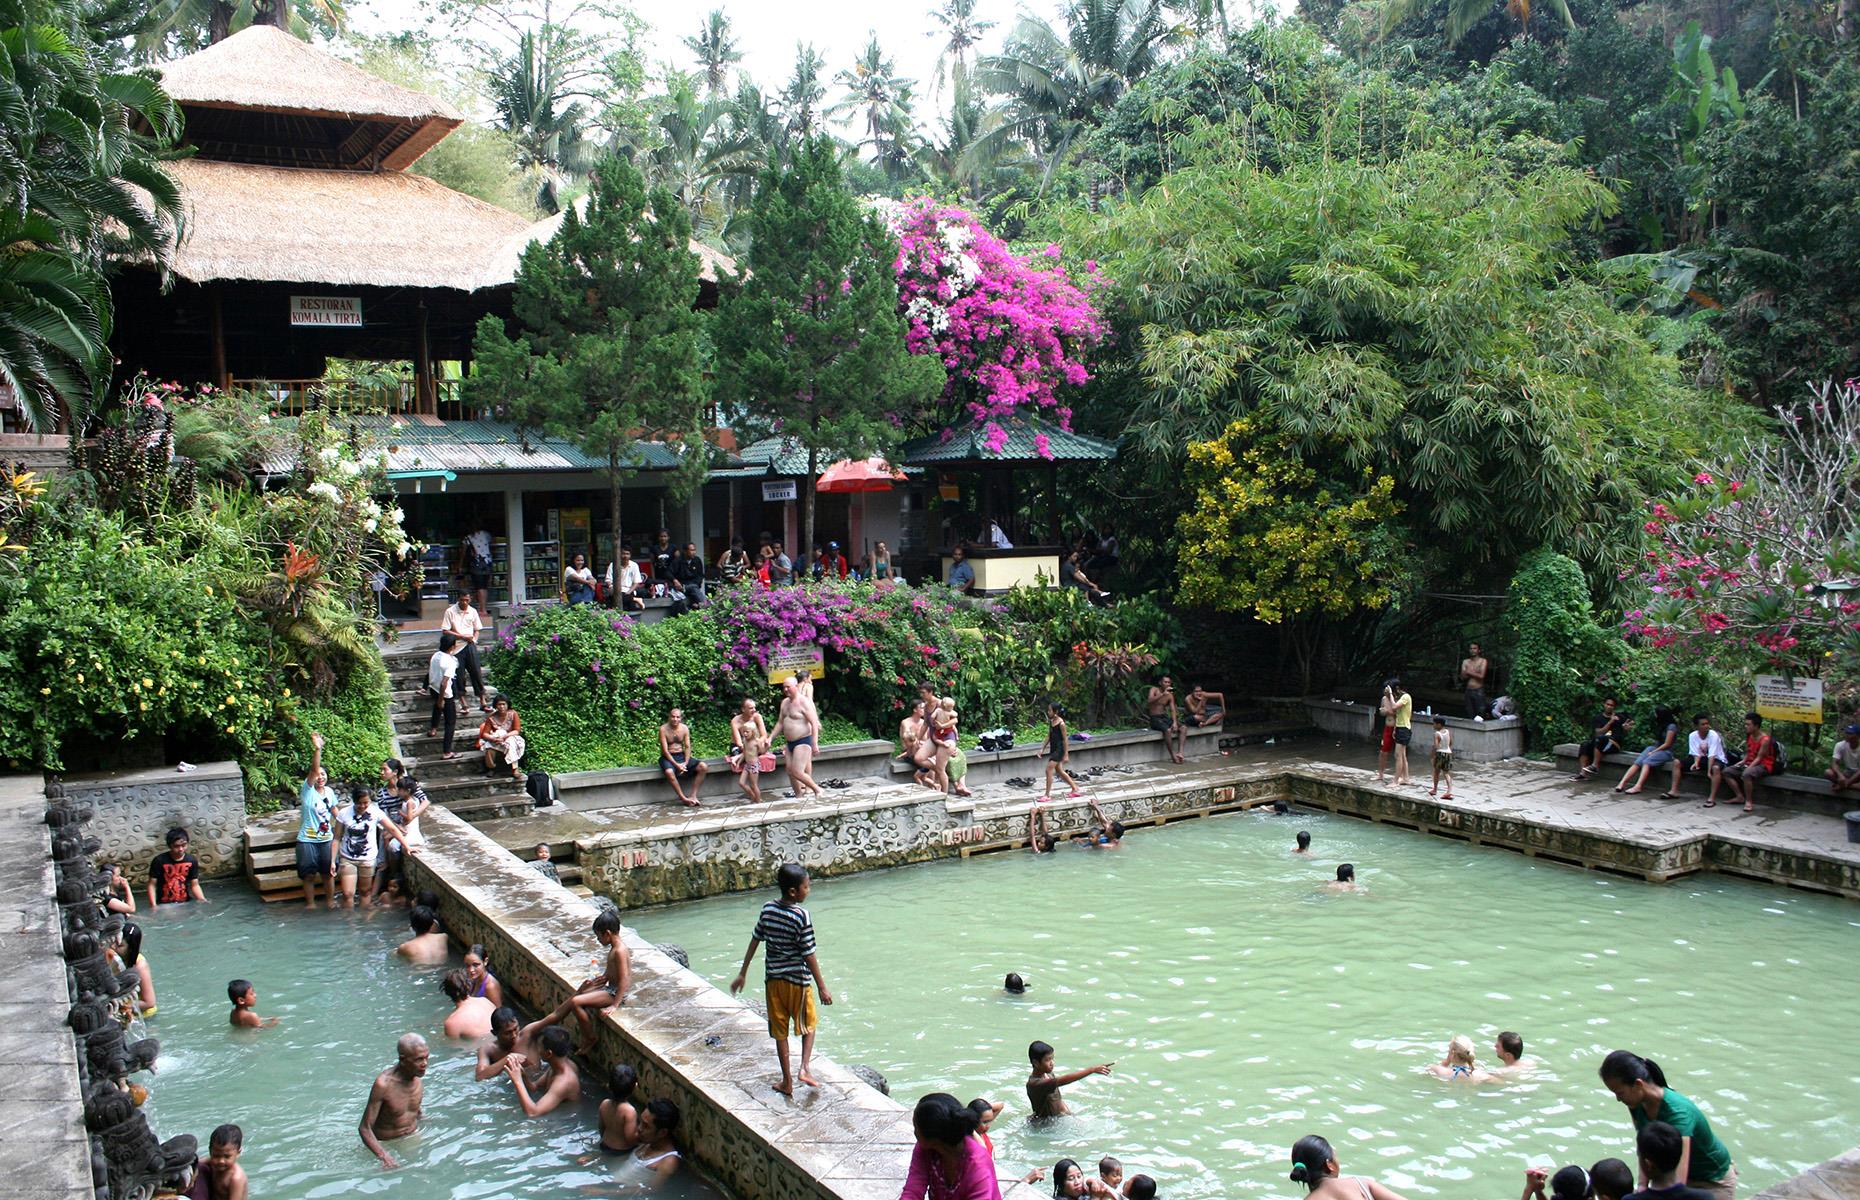 <p>With temperatures up to 38°C (100°F) and a 26% sulphur content to help soothe irritated skin, the Banjar Hot Springs of Bali, Indonesia are famed for their healing waters. The springs are located in the northern reaches of the island, near the Brahma Vihara Arama Buddhist monastery, and offer three different pools: a main swimming pool, one for children, and one where the silky green spring water spouts from a row of dragon heads.</p>